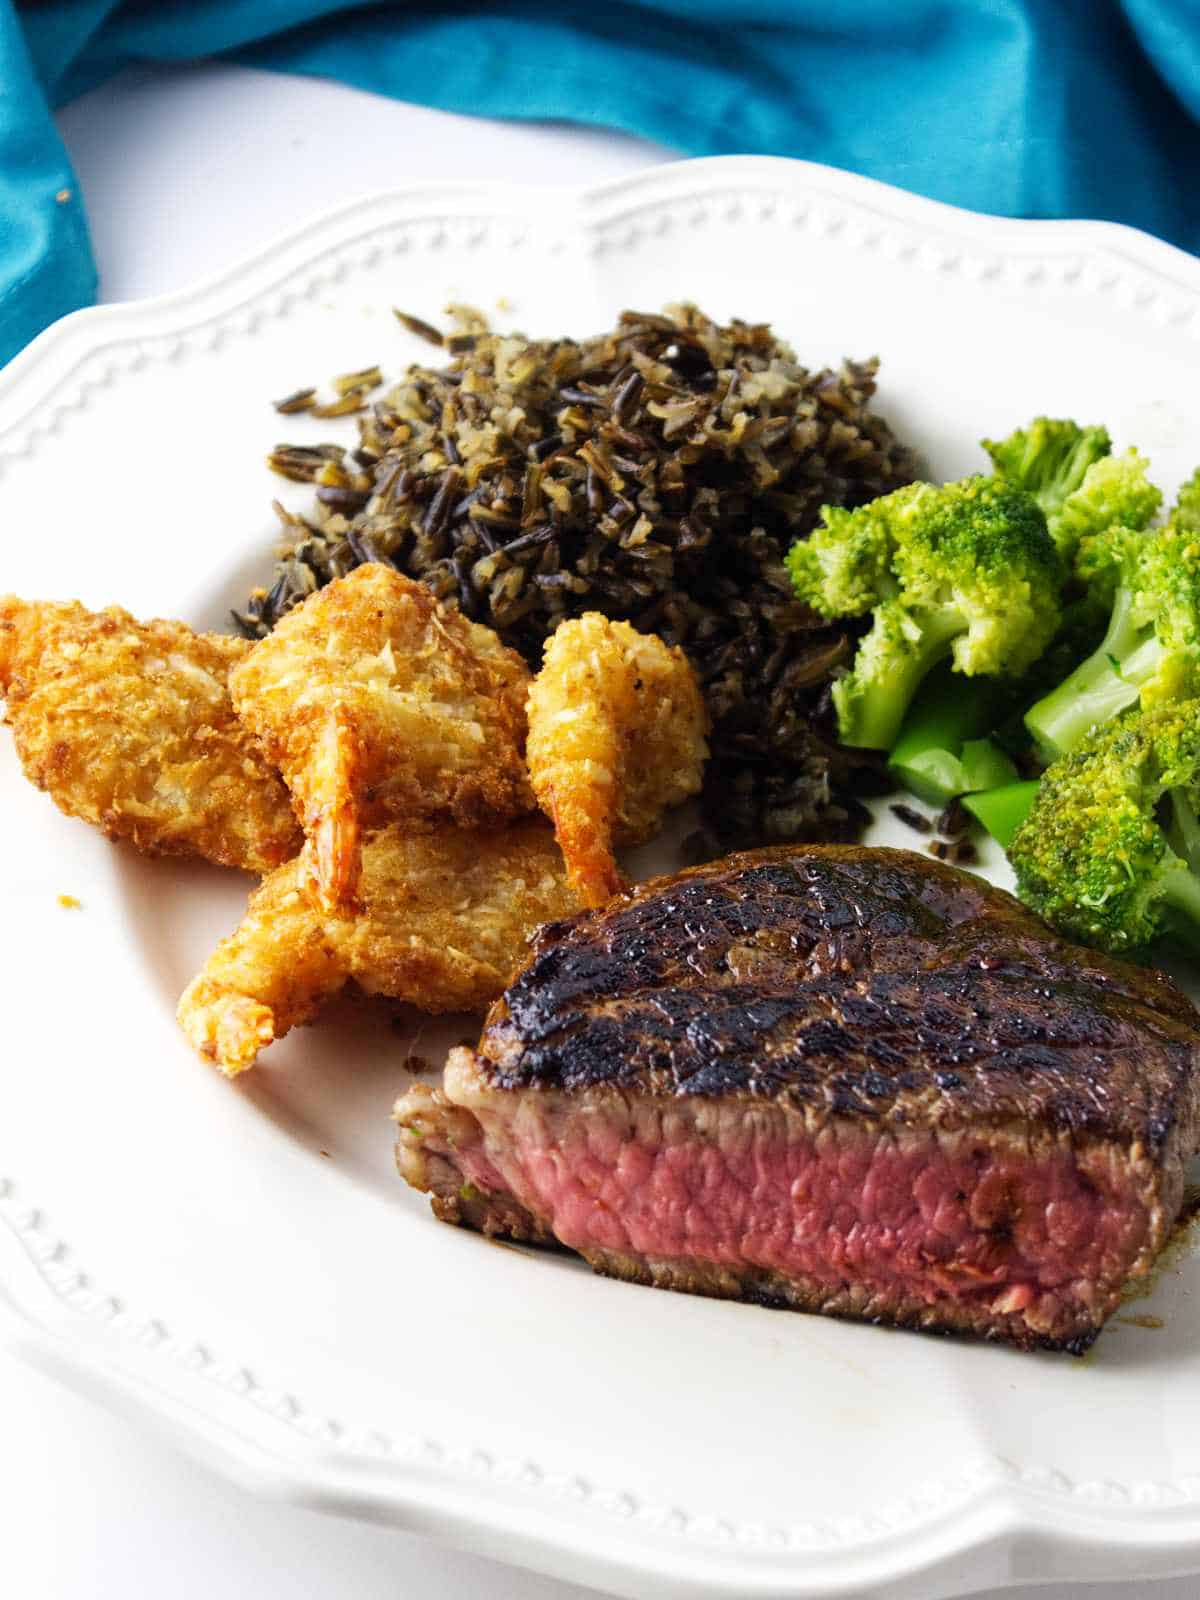 serving of breaded shrimp, steak, broccoli, and wild rice on a white plate.